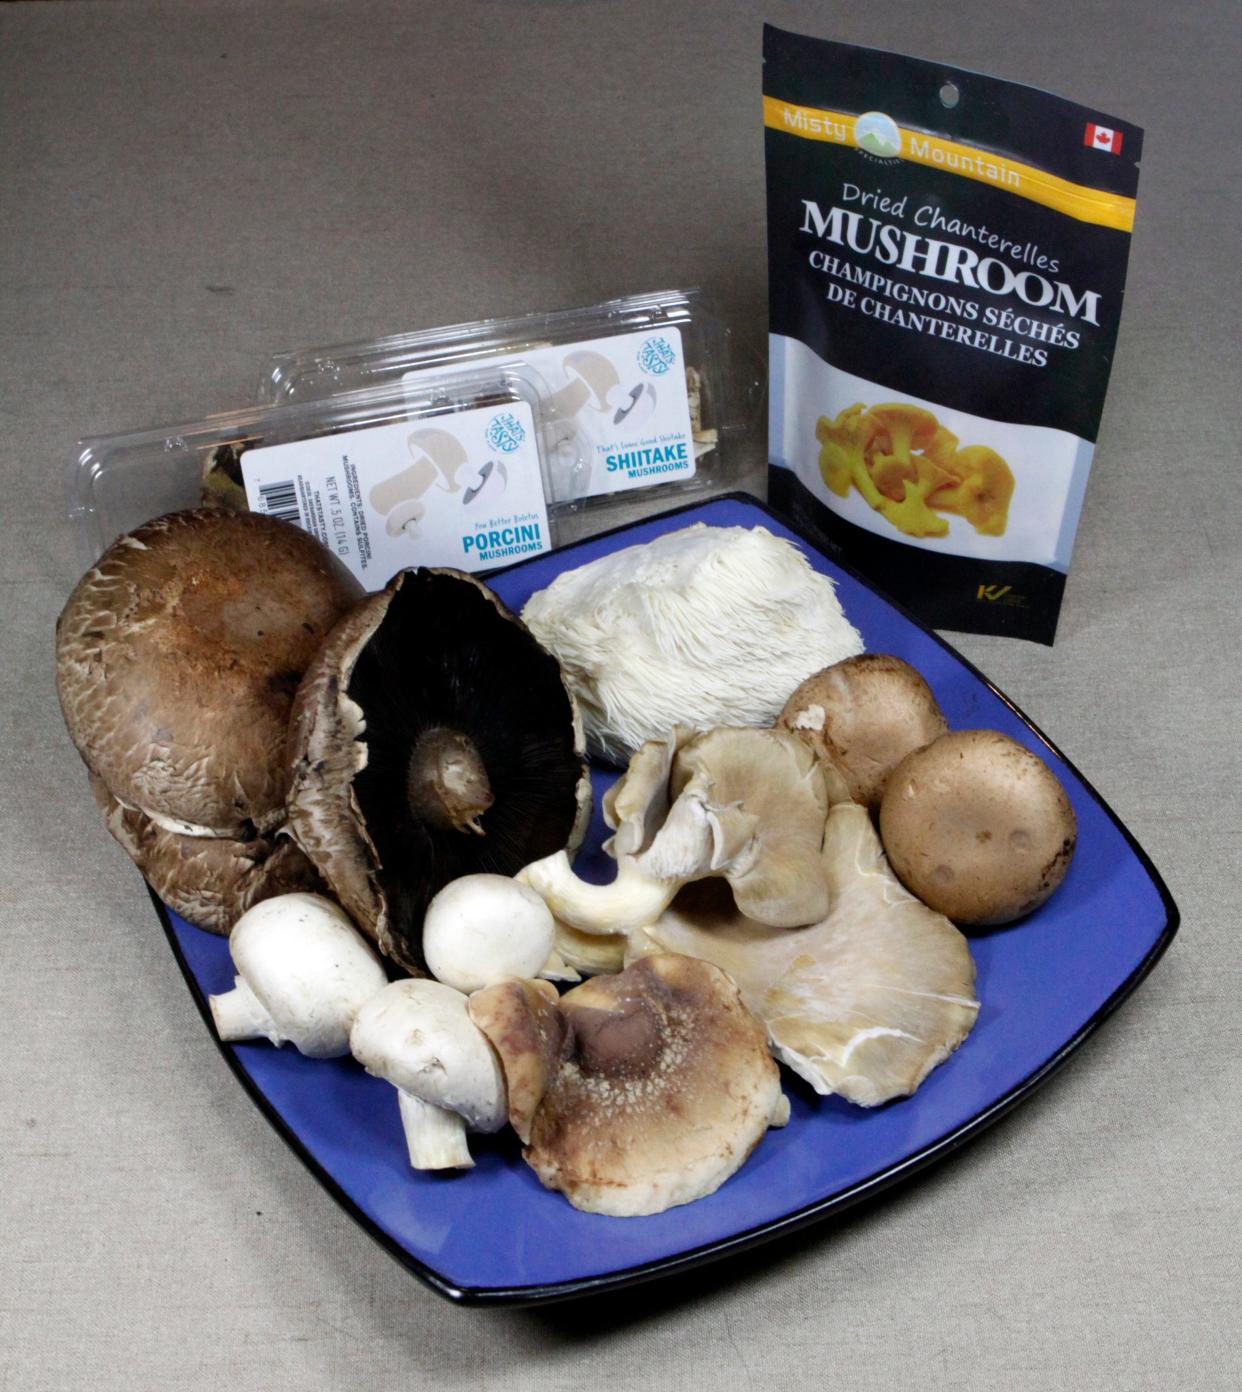 Edible mushrooms come in many varieties. On the plate, clockwise from top left, are fresh portobello caps, lion's mane, baby portobello, oyster, shiitake and white button mushrooms. Packaged in the back are dried porcini, shiitake and chanterelle mushrooms.